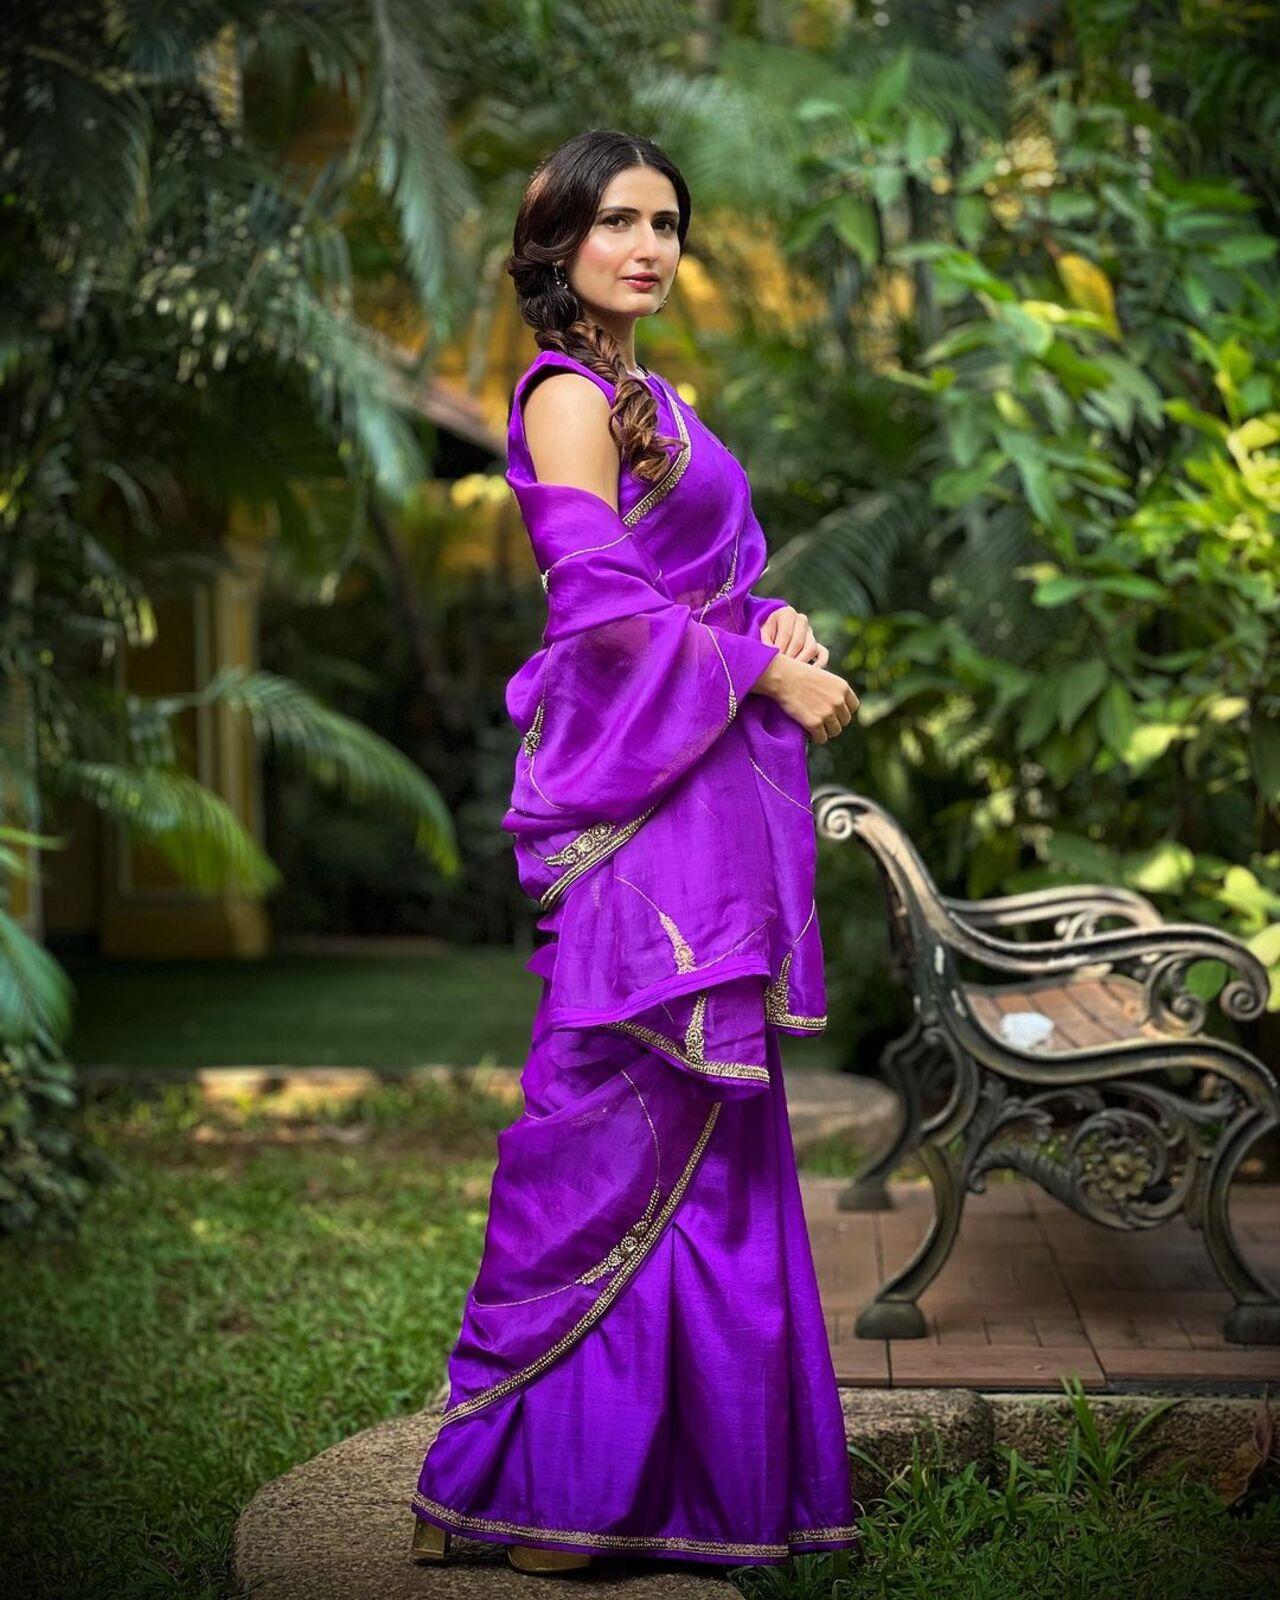 Fatima's plain purple saree are goals. The look of the actress can be a big hit if you want to attend any family function